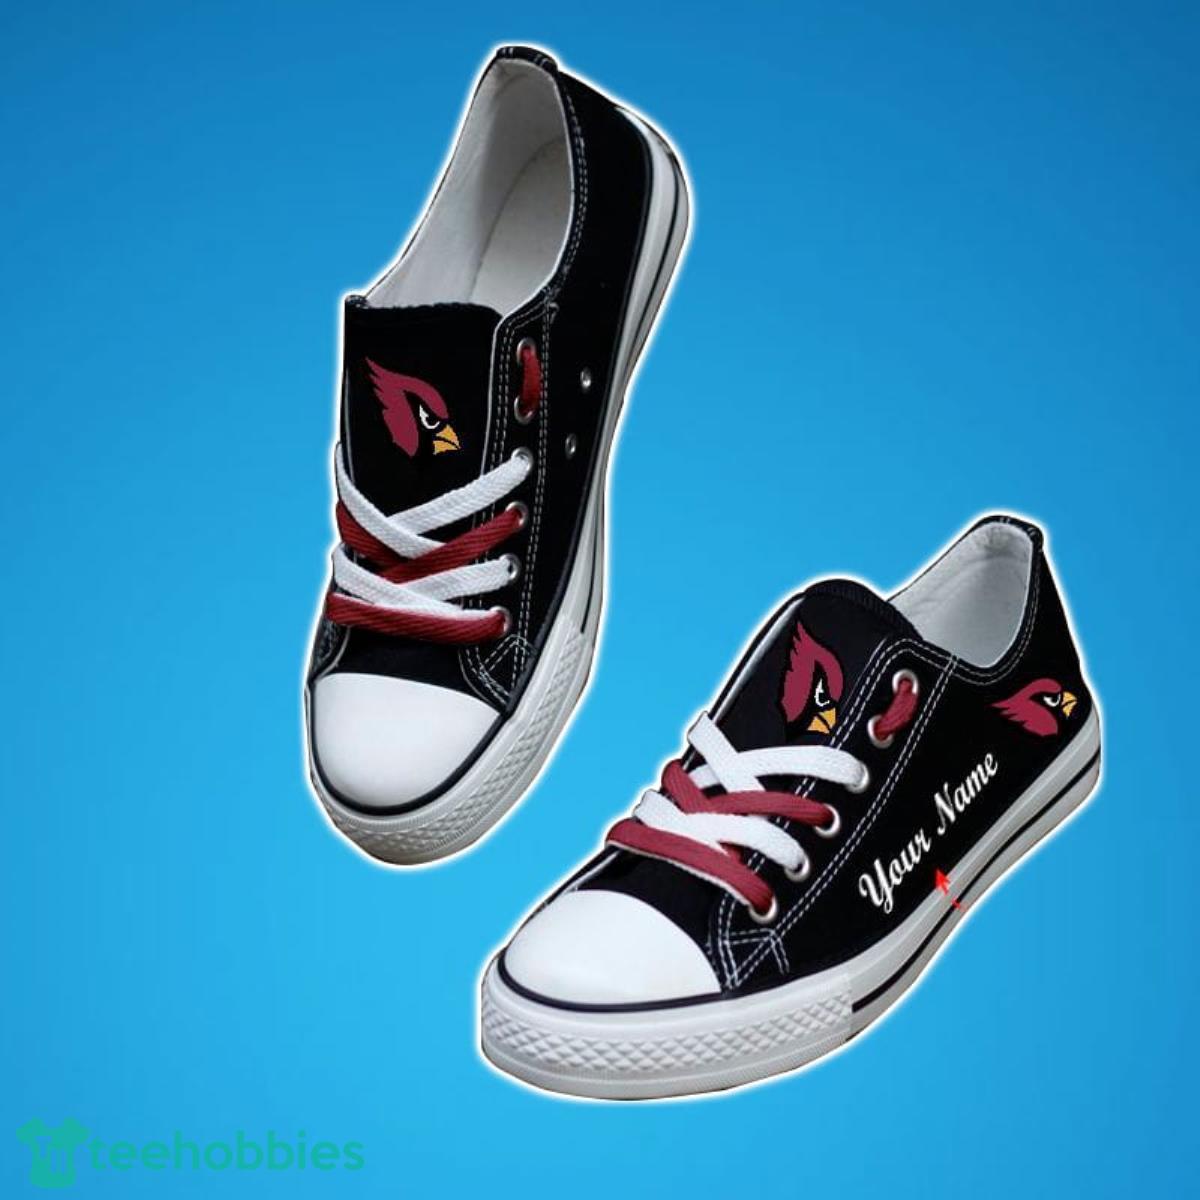 Arizona Cardinals Personalized New Low Top Shoes Best Gift For Men And Women Fans Product Photo 1